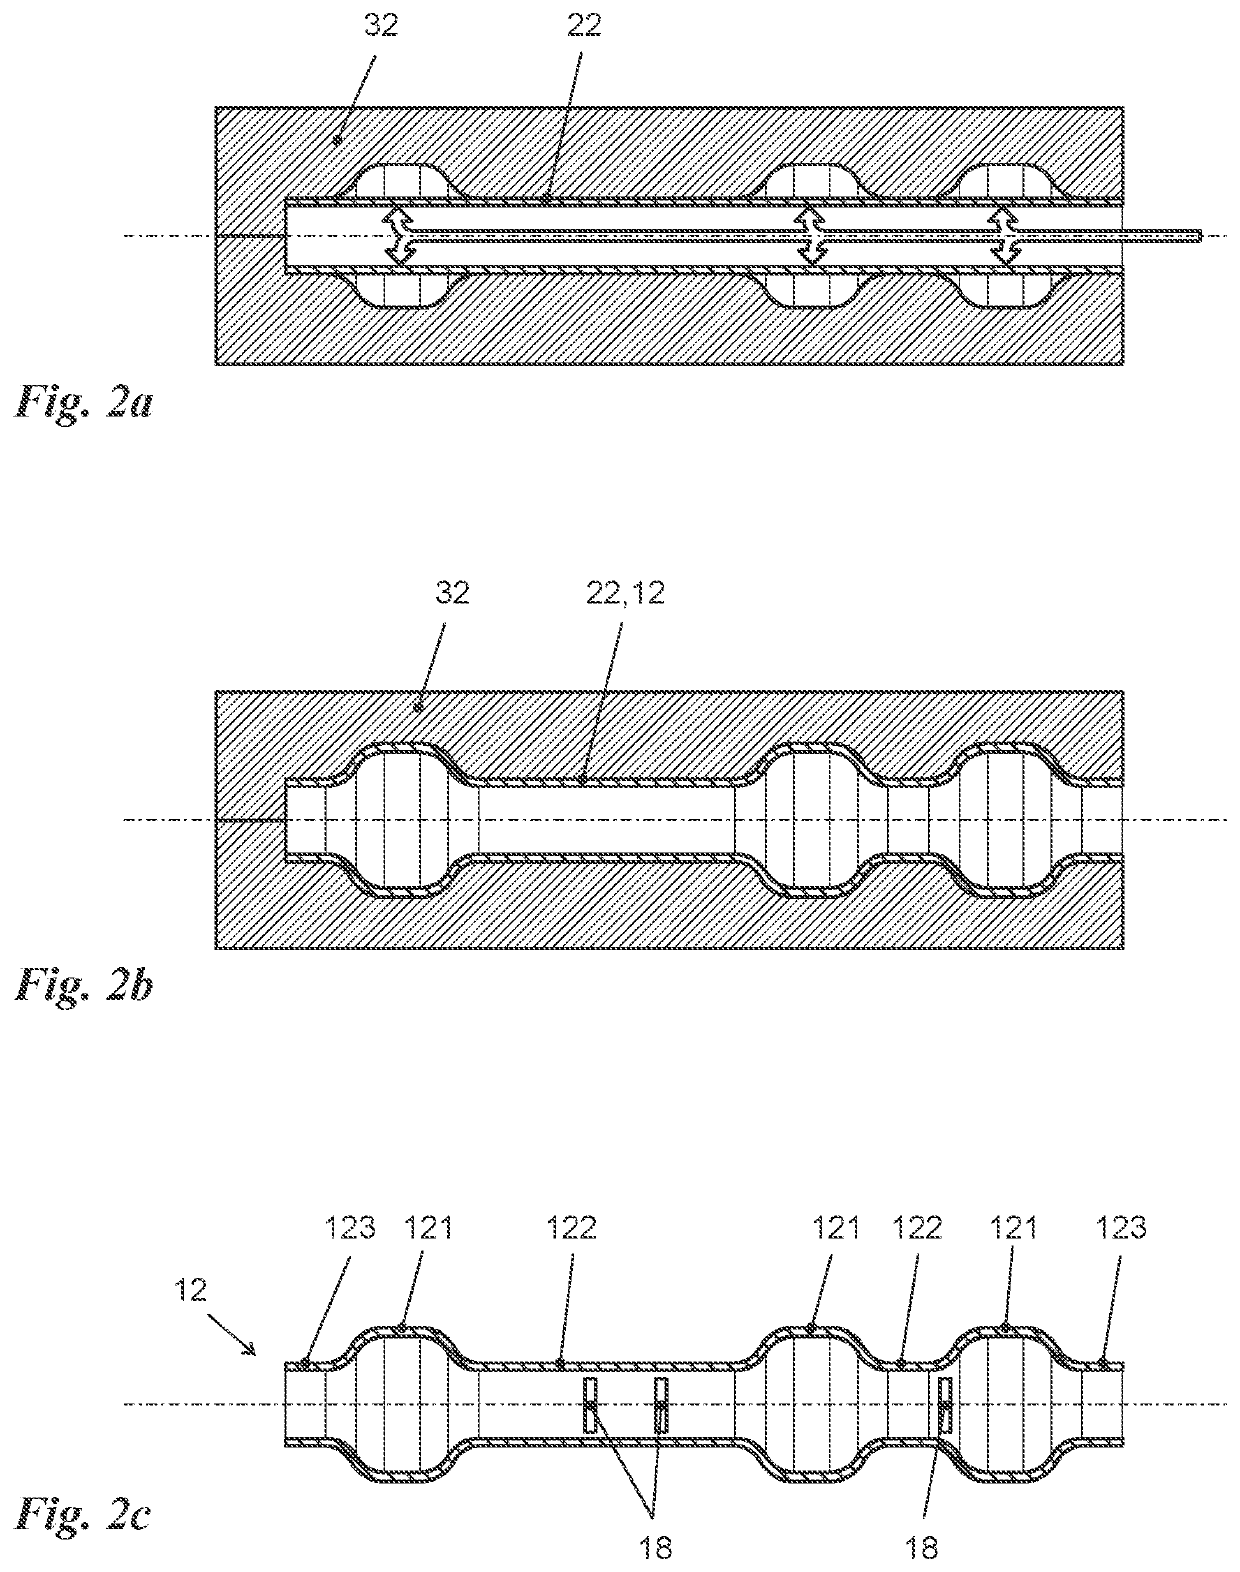 Sound attenuator for a fluid flow line and method of manufacturing the same